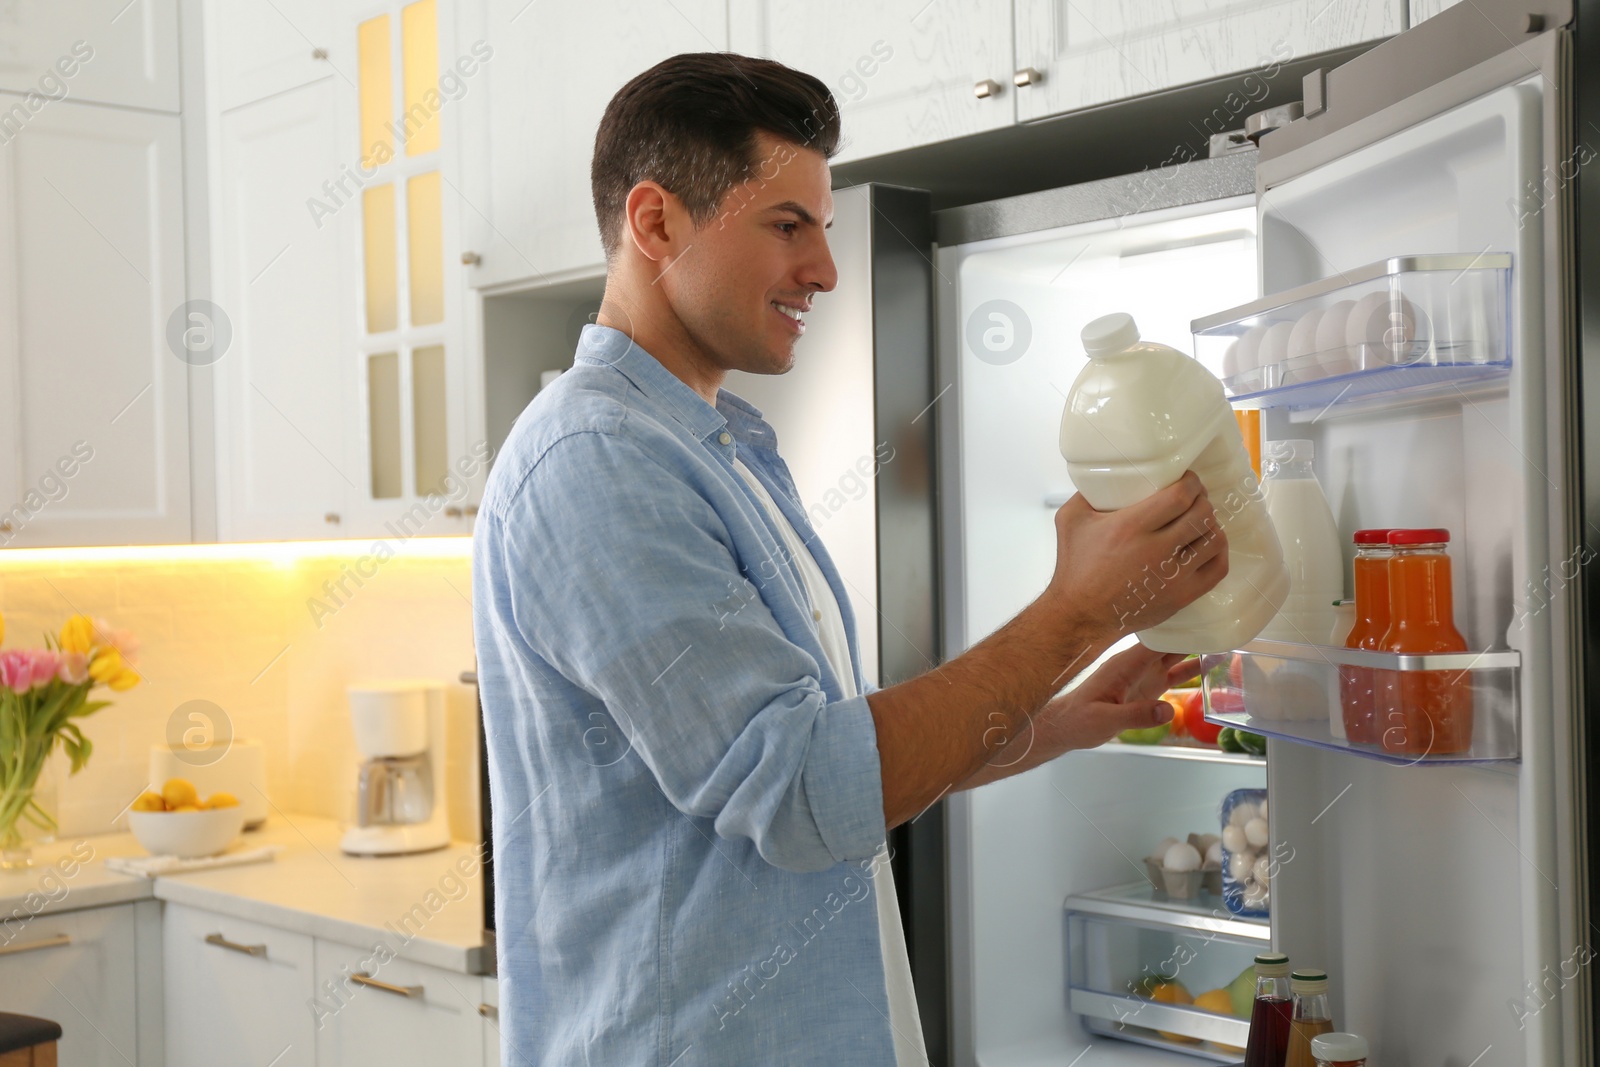 Photo of Man putting gallon of milk into refrigerator in kitchen